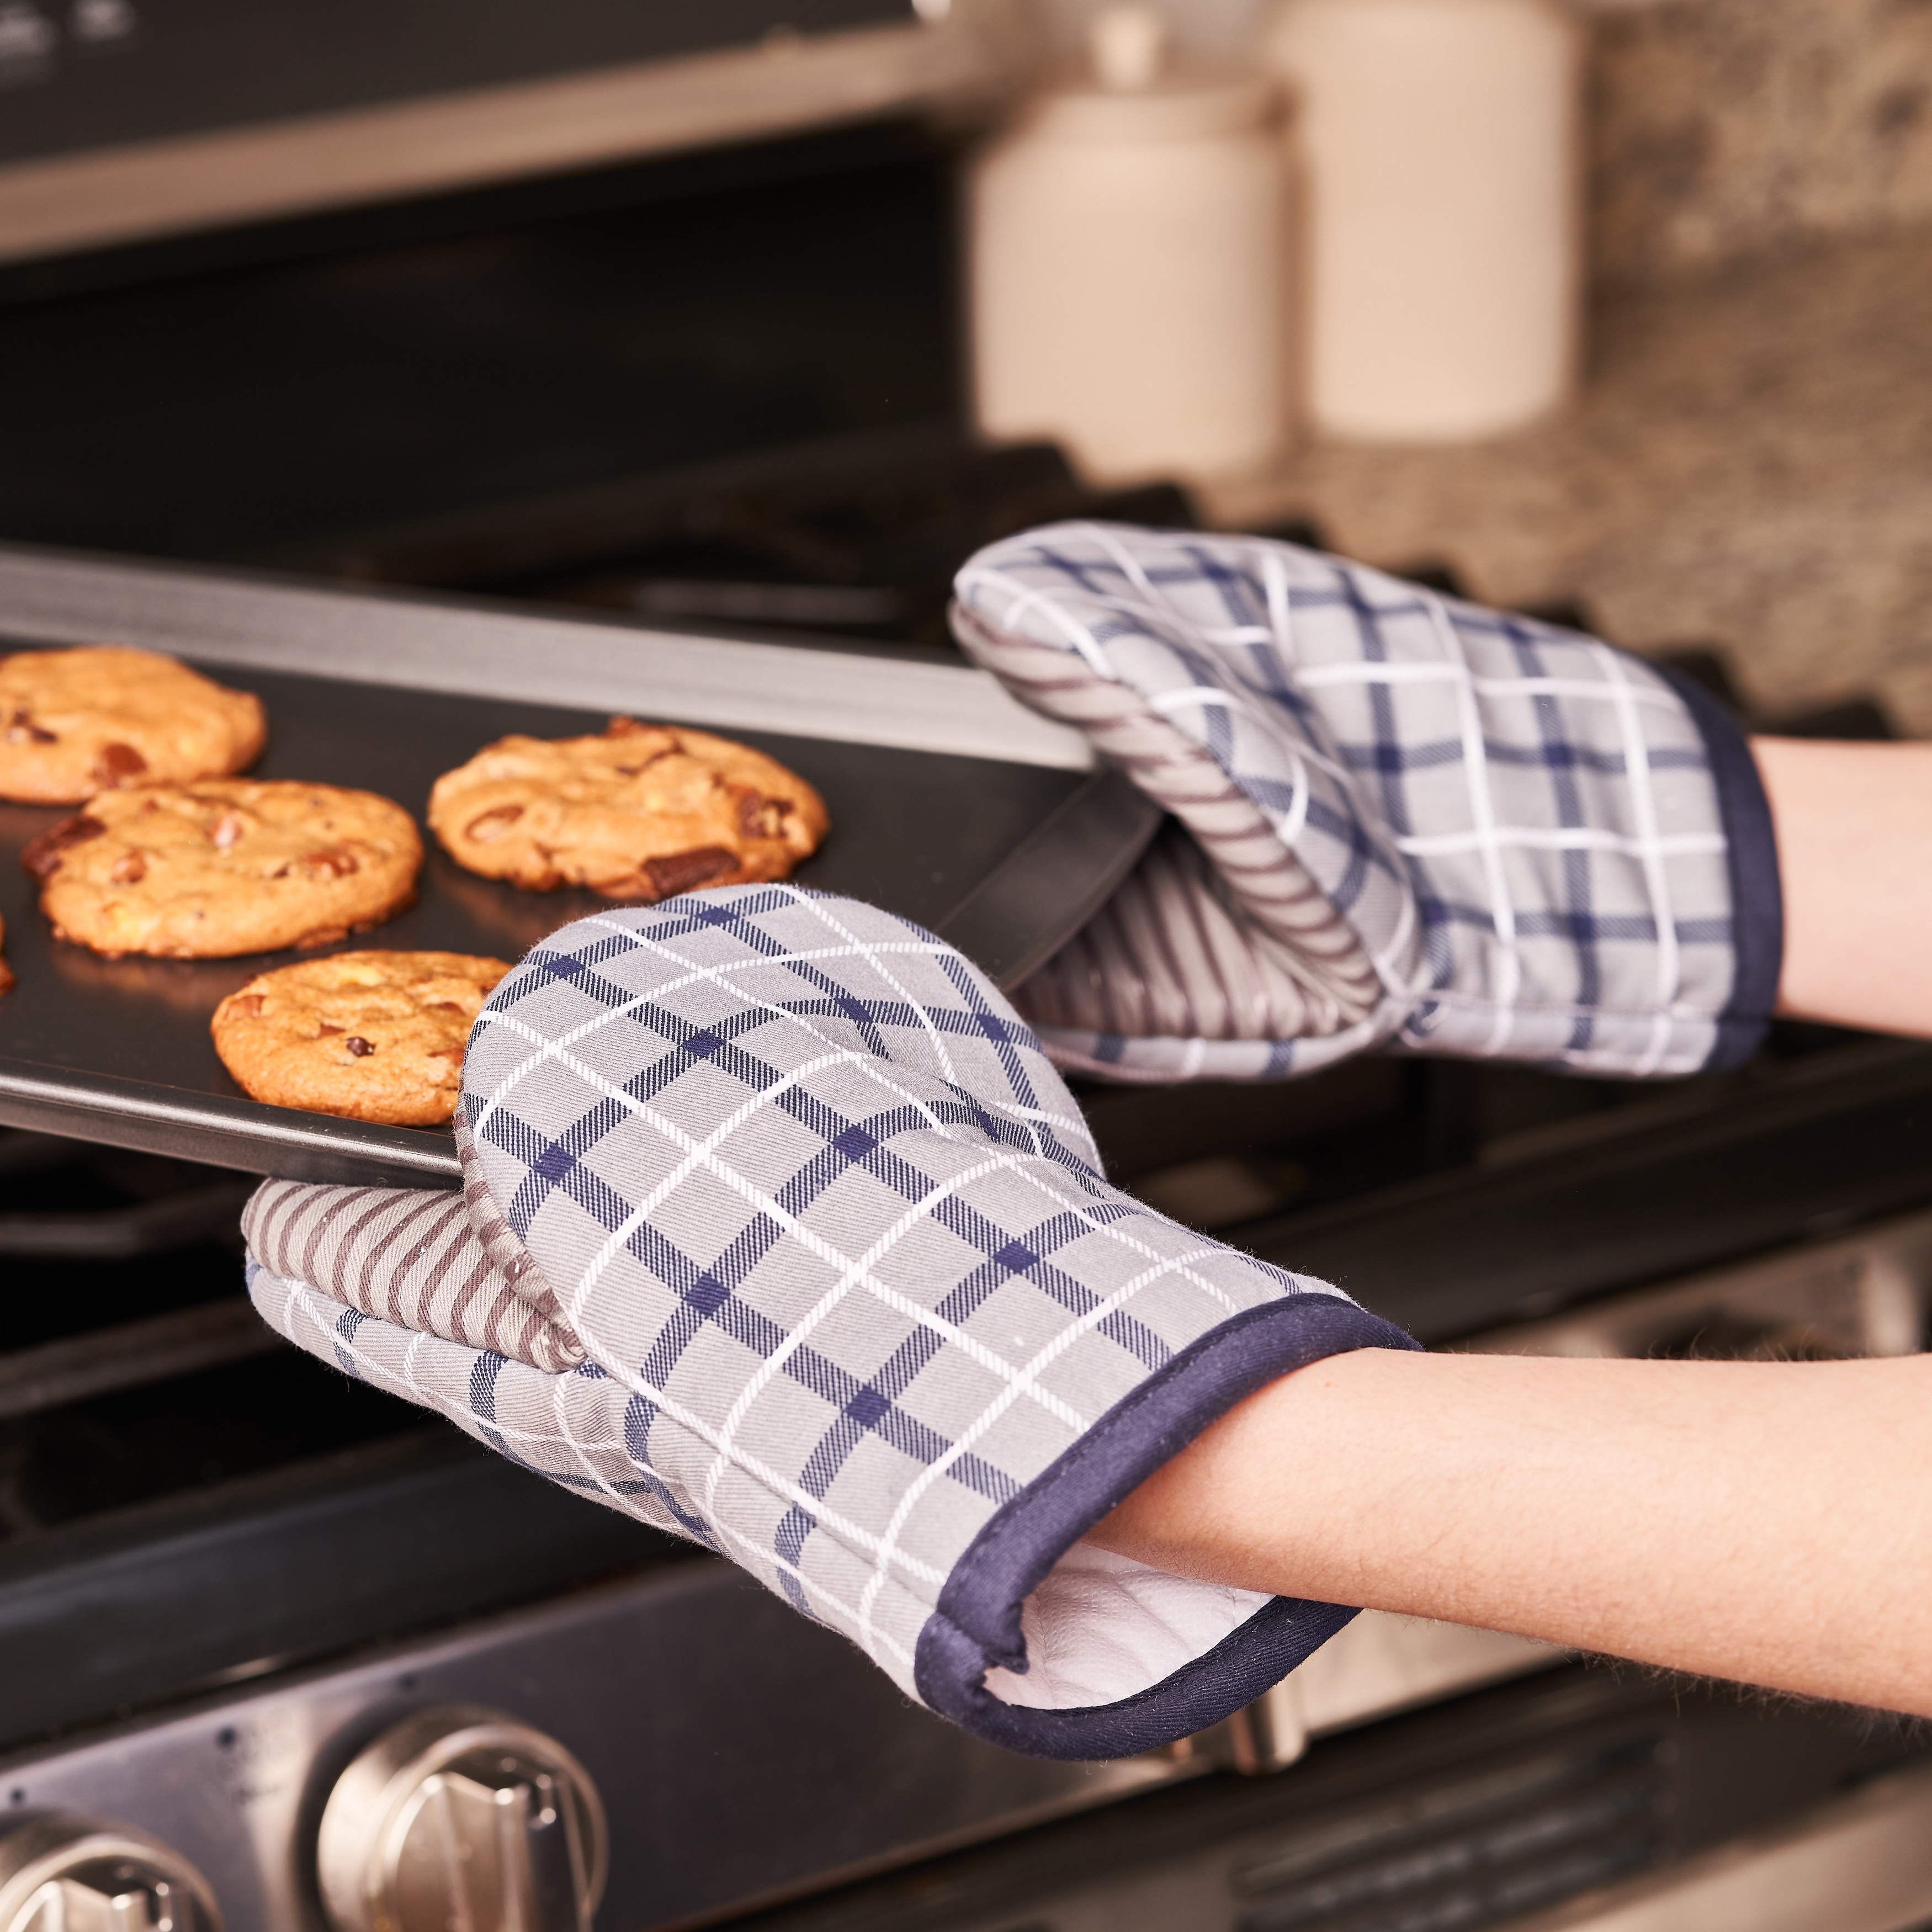 Nautica Grey 100% Cotton Oven Mitts with Silicone Palm (Set of 2)